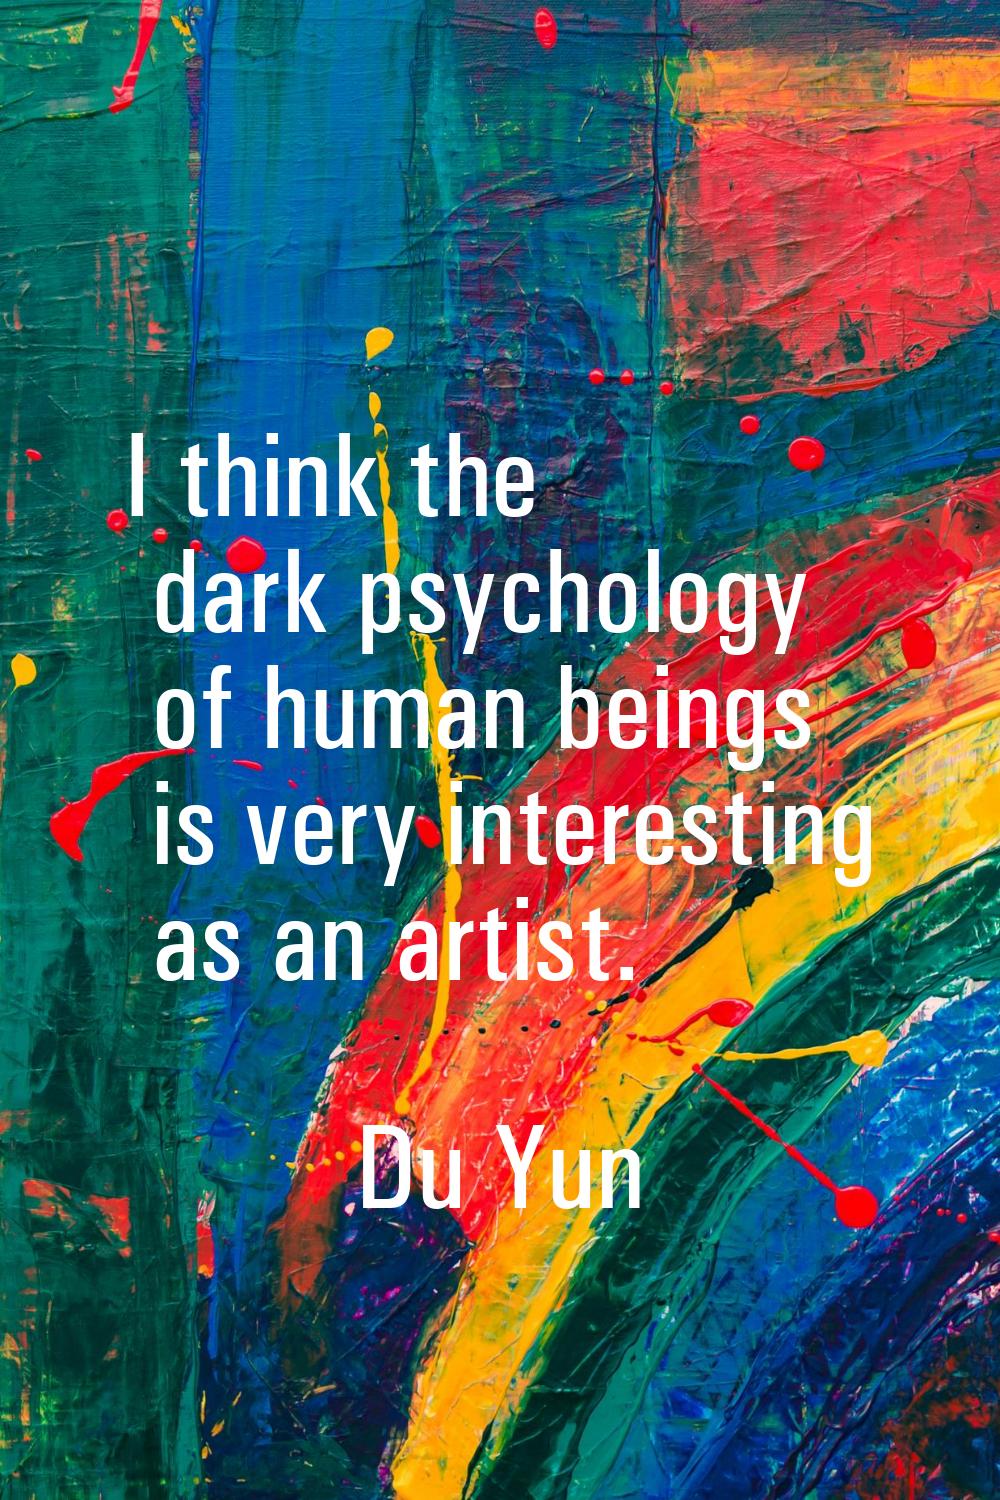 I think the dark psychology of human beings is very interesting as an artist.